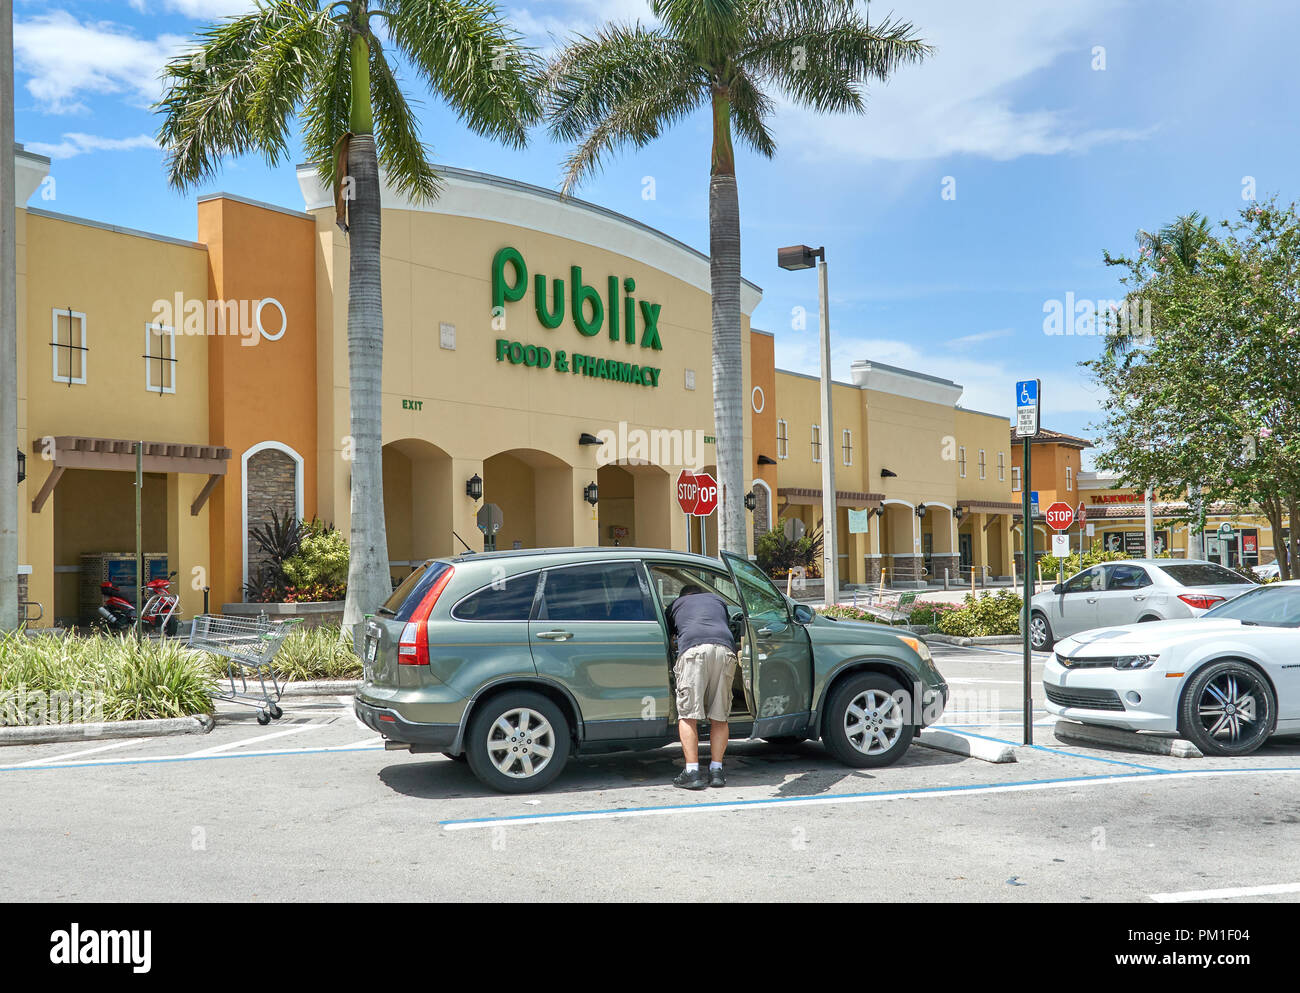 MIAMI, USA - AUGUST 22, 2018: Publix store logo. Publix Super Markets is an employee-owned, American supermarket chain headquartered in Lakeland, Flor Stock Photo